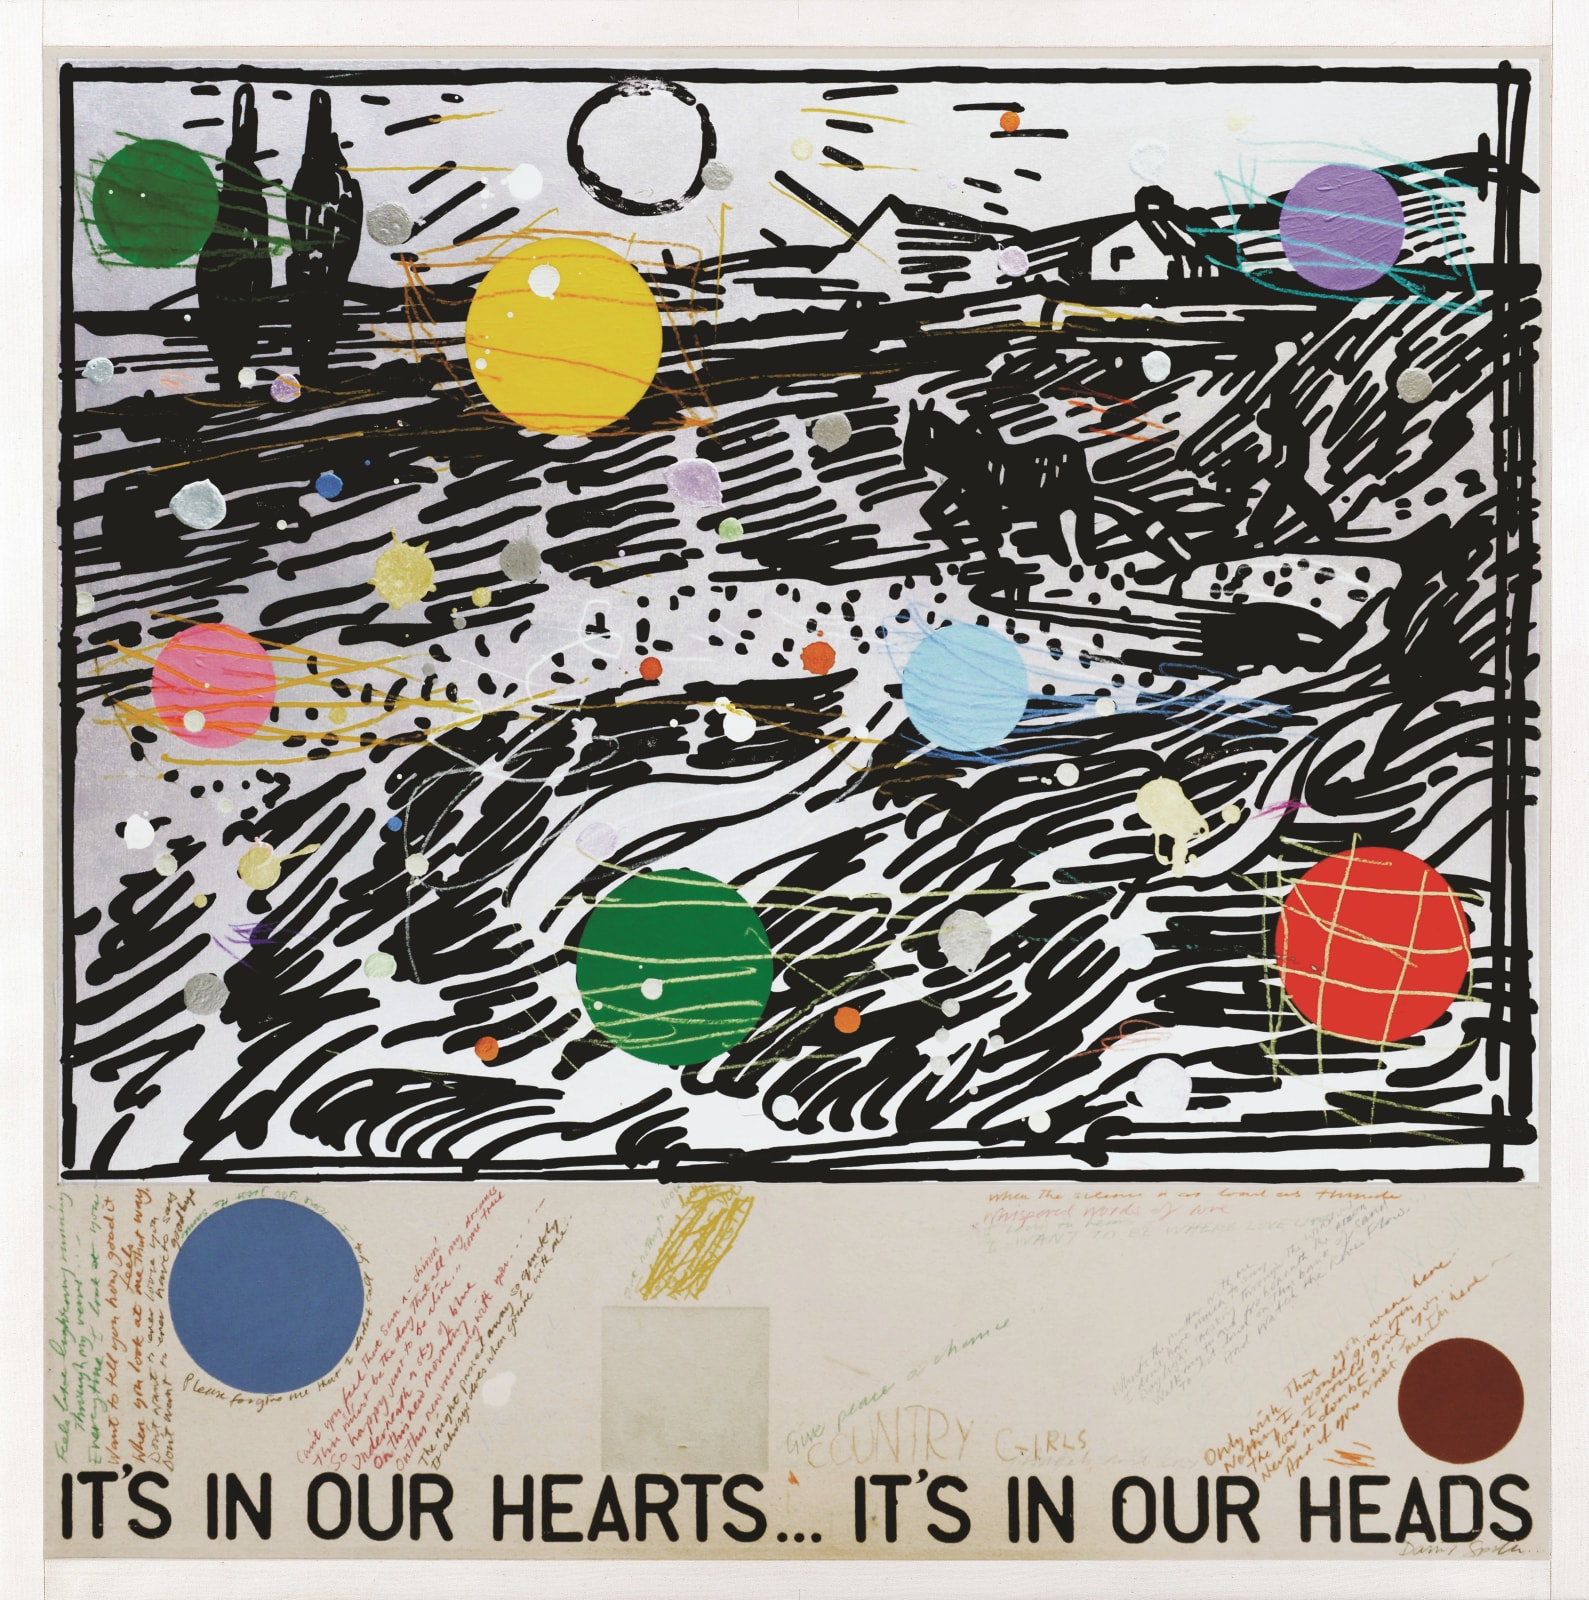 David Spiller, It's in Our Hearts, 2001